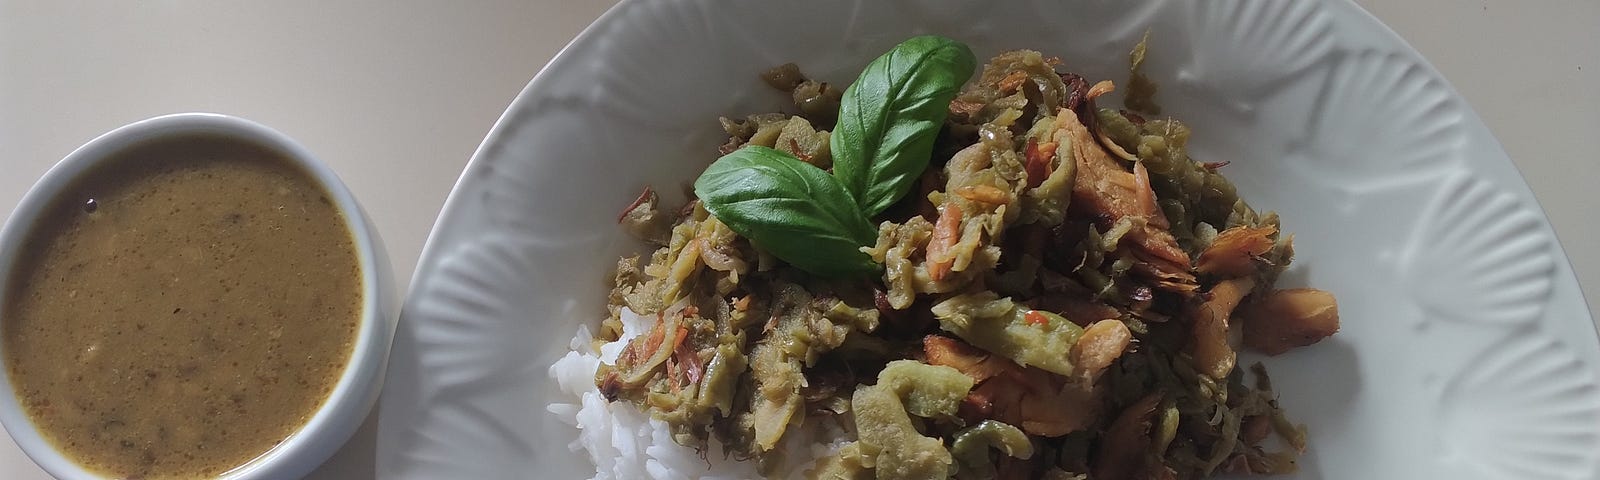 A white dish plated with white rice, green cooked karela aka bitter melon and decorated with cherry tomatoes, halved and arranged to replicate a red flower. On it’s left side a tiny bowl of green dahl soup a delicious addition to the meal.